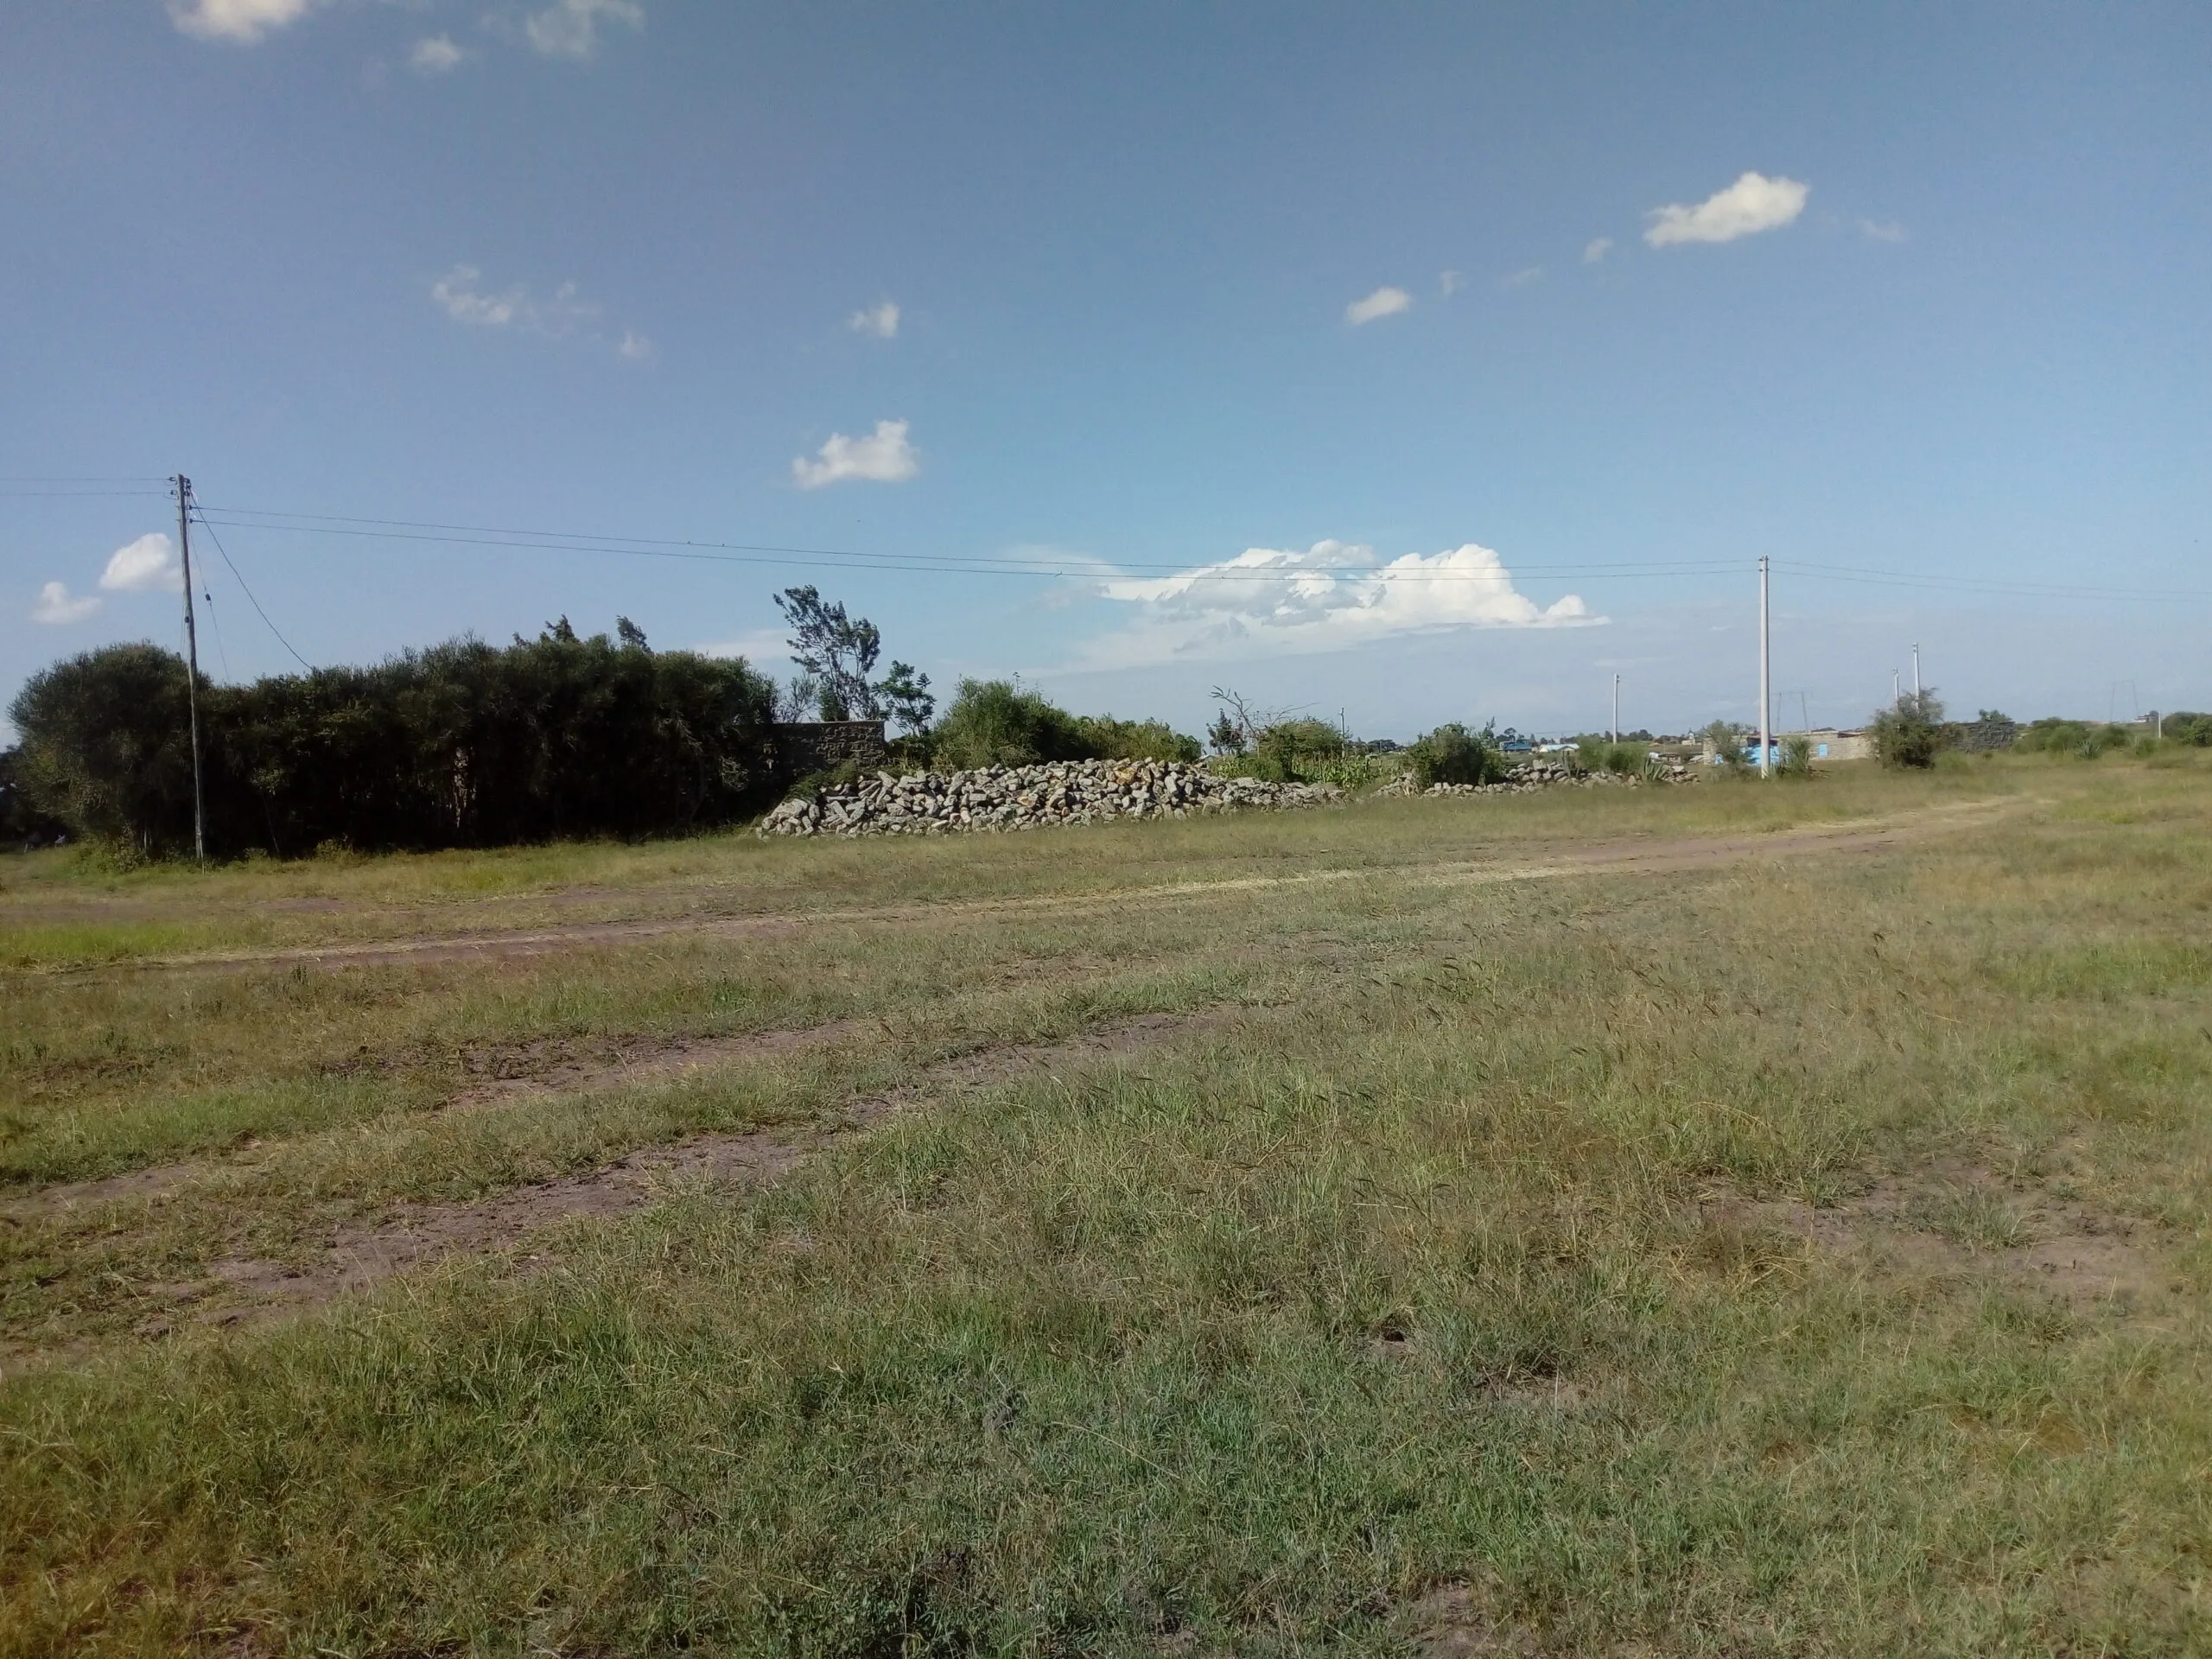 VACANT RESIDENTAIL PLOT IN KIRATINA AREA, OFF EASTERN BYPASS KAMAKIS